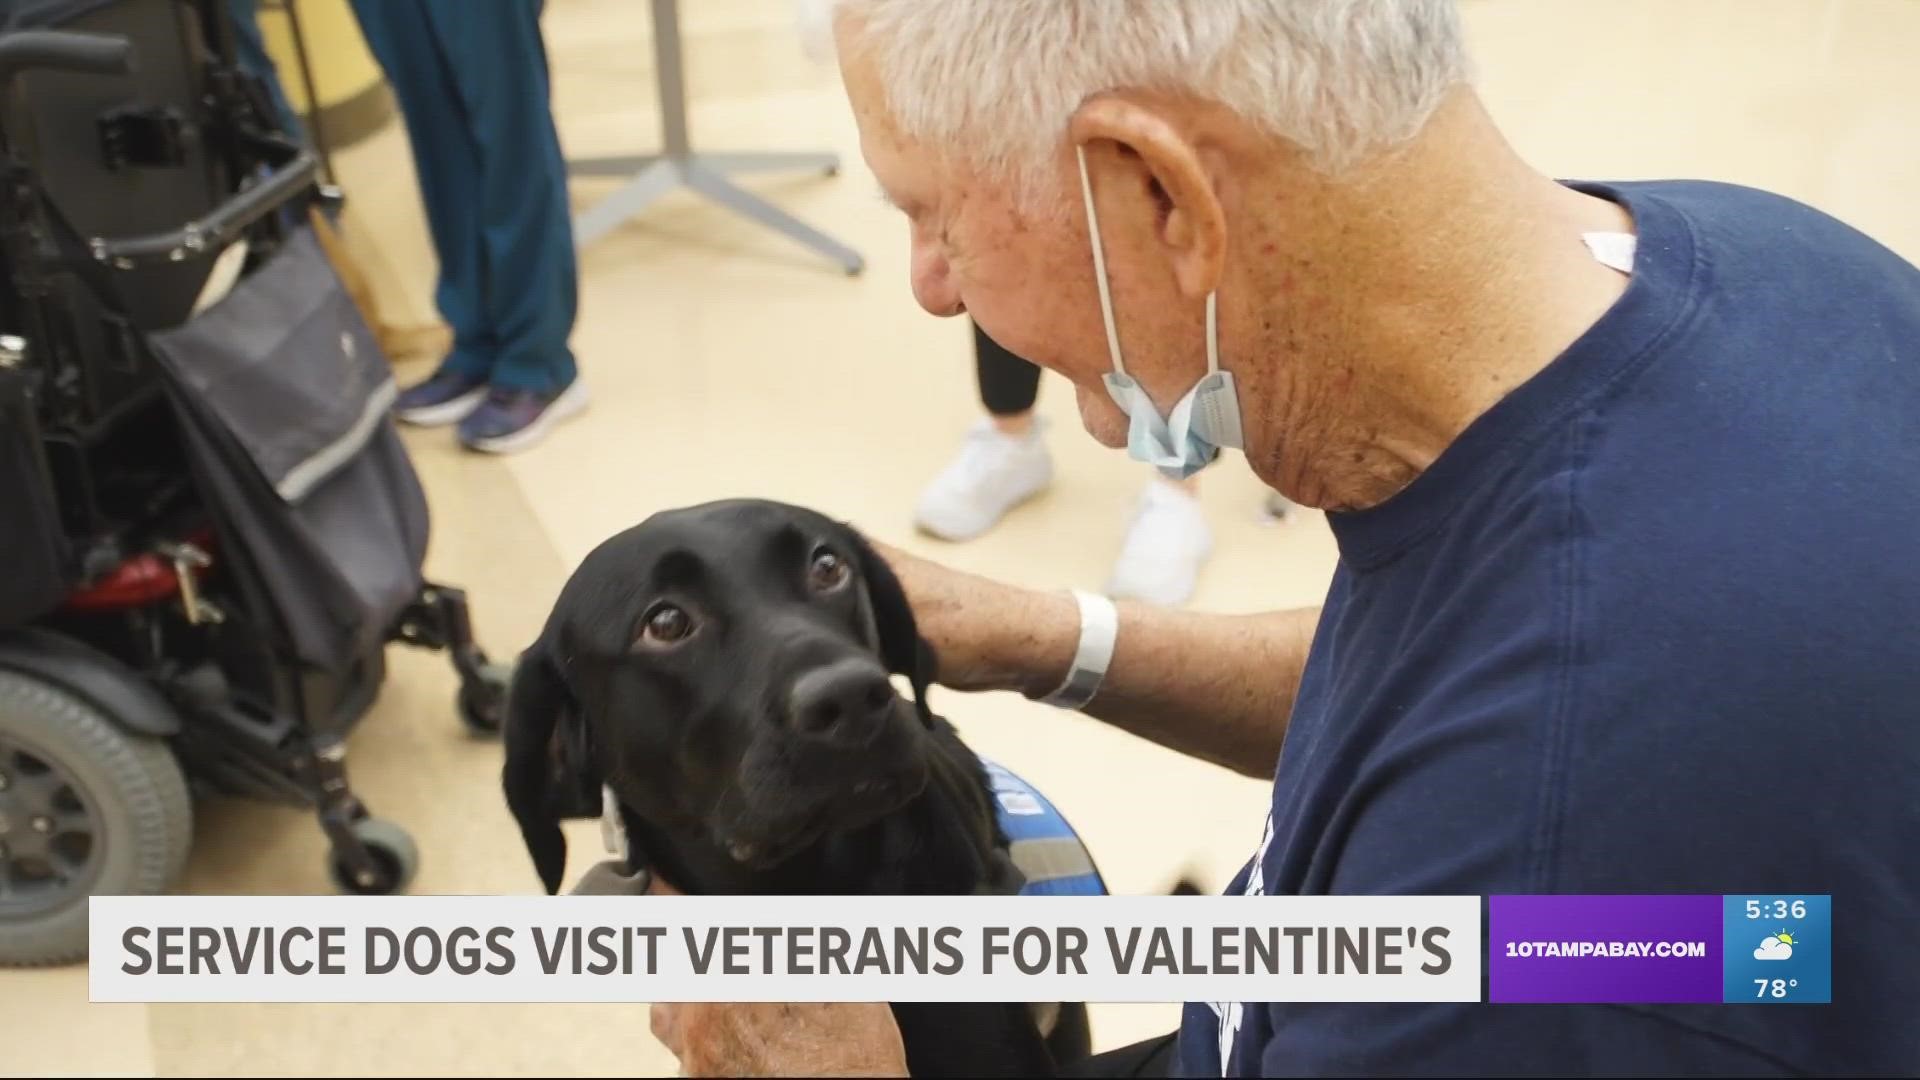 The pups offered veterans hugs and practiced their skills by retrieving different Valentine's Day gifts.